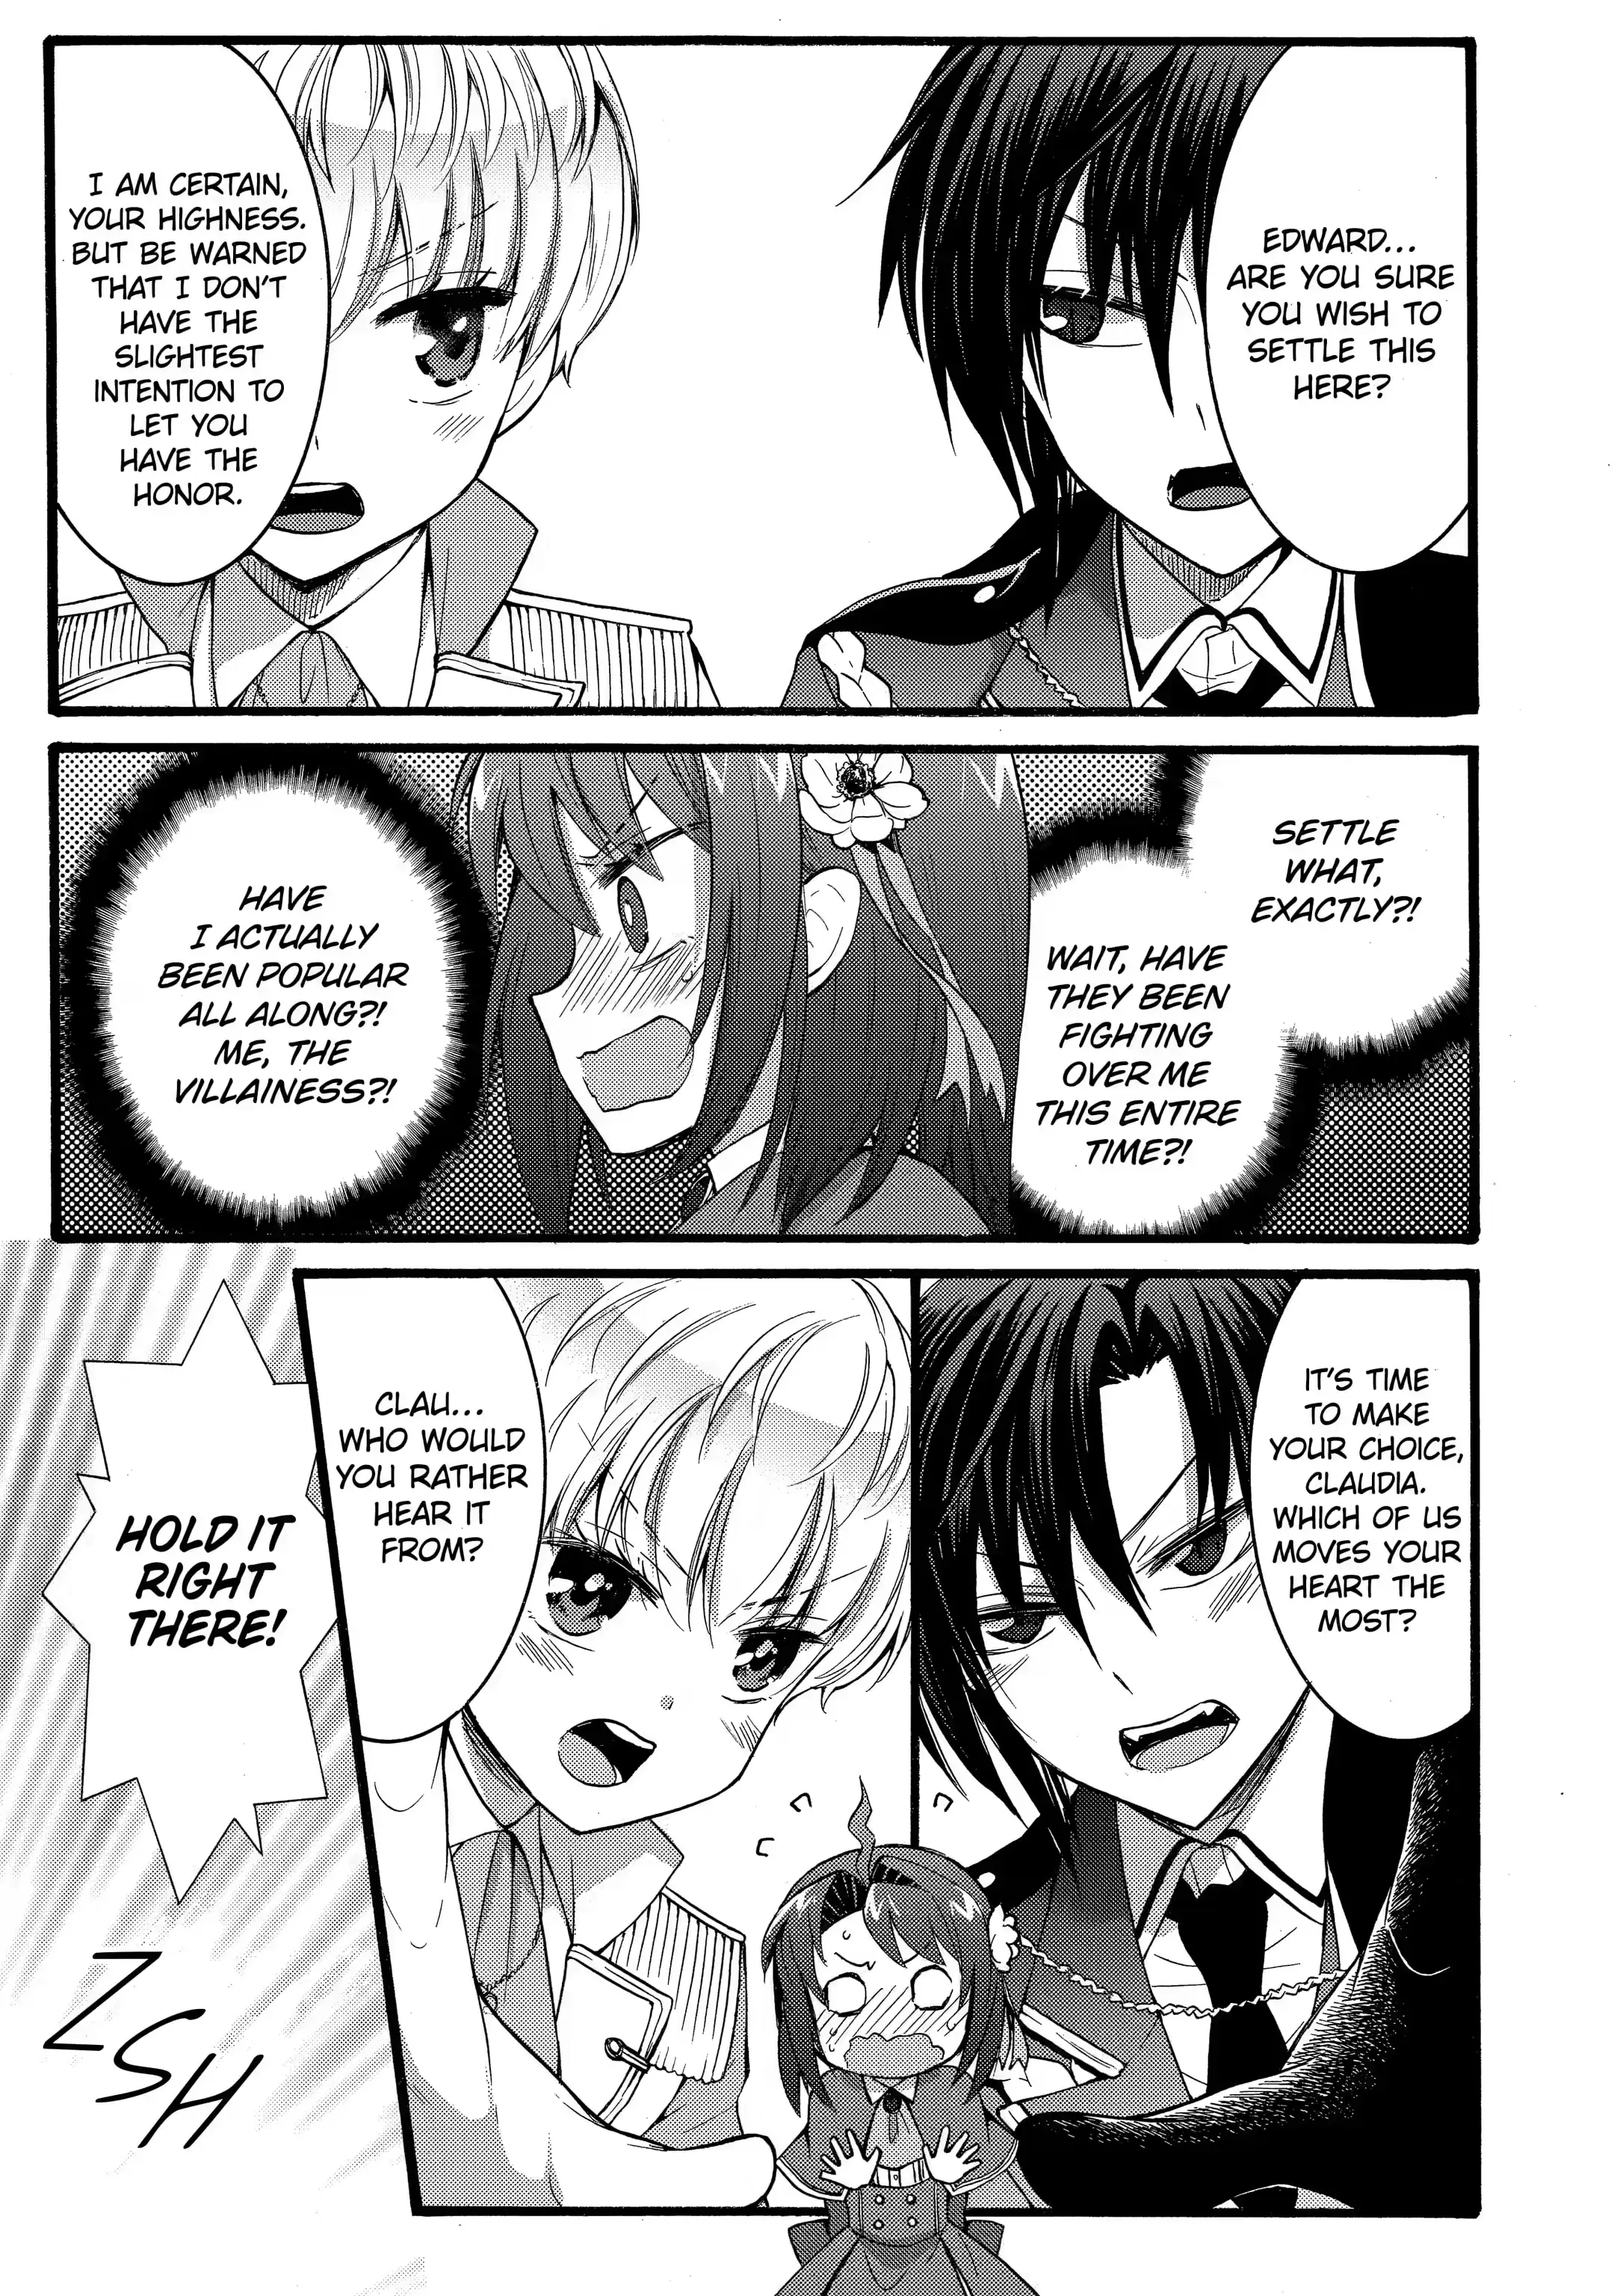 How to Survive a Thousand Deaths: Accidentally Wooing Everyone as an Ex-gamer Made Villainess! - chapter 14.3 - #5